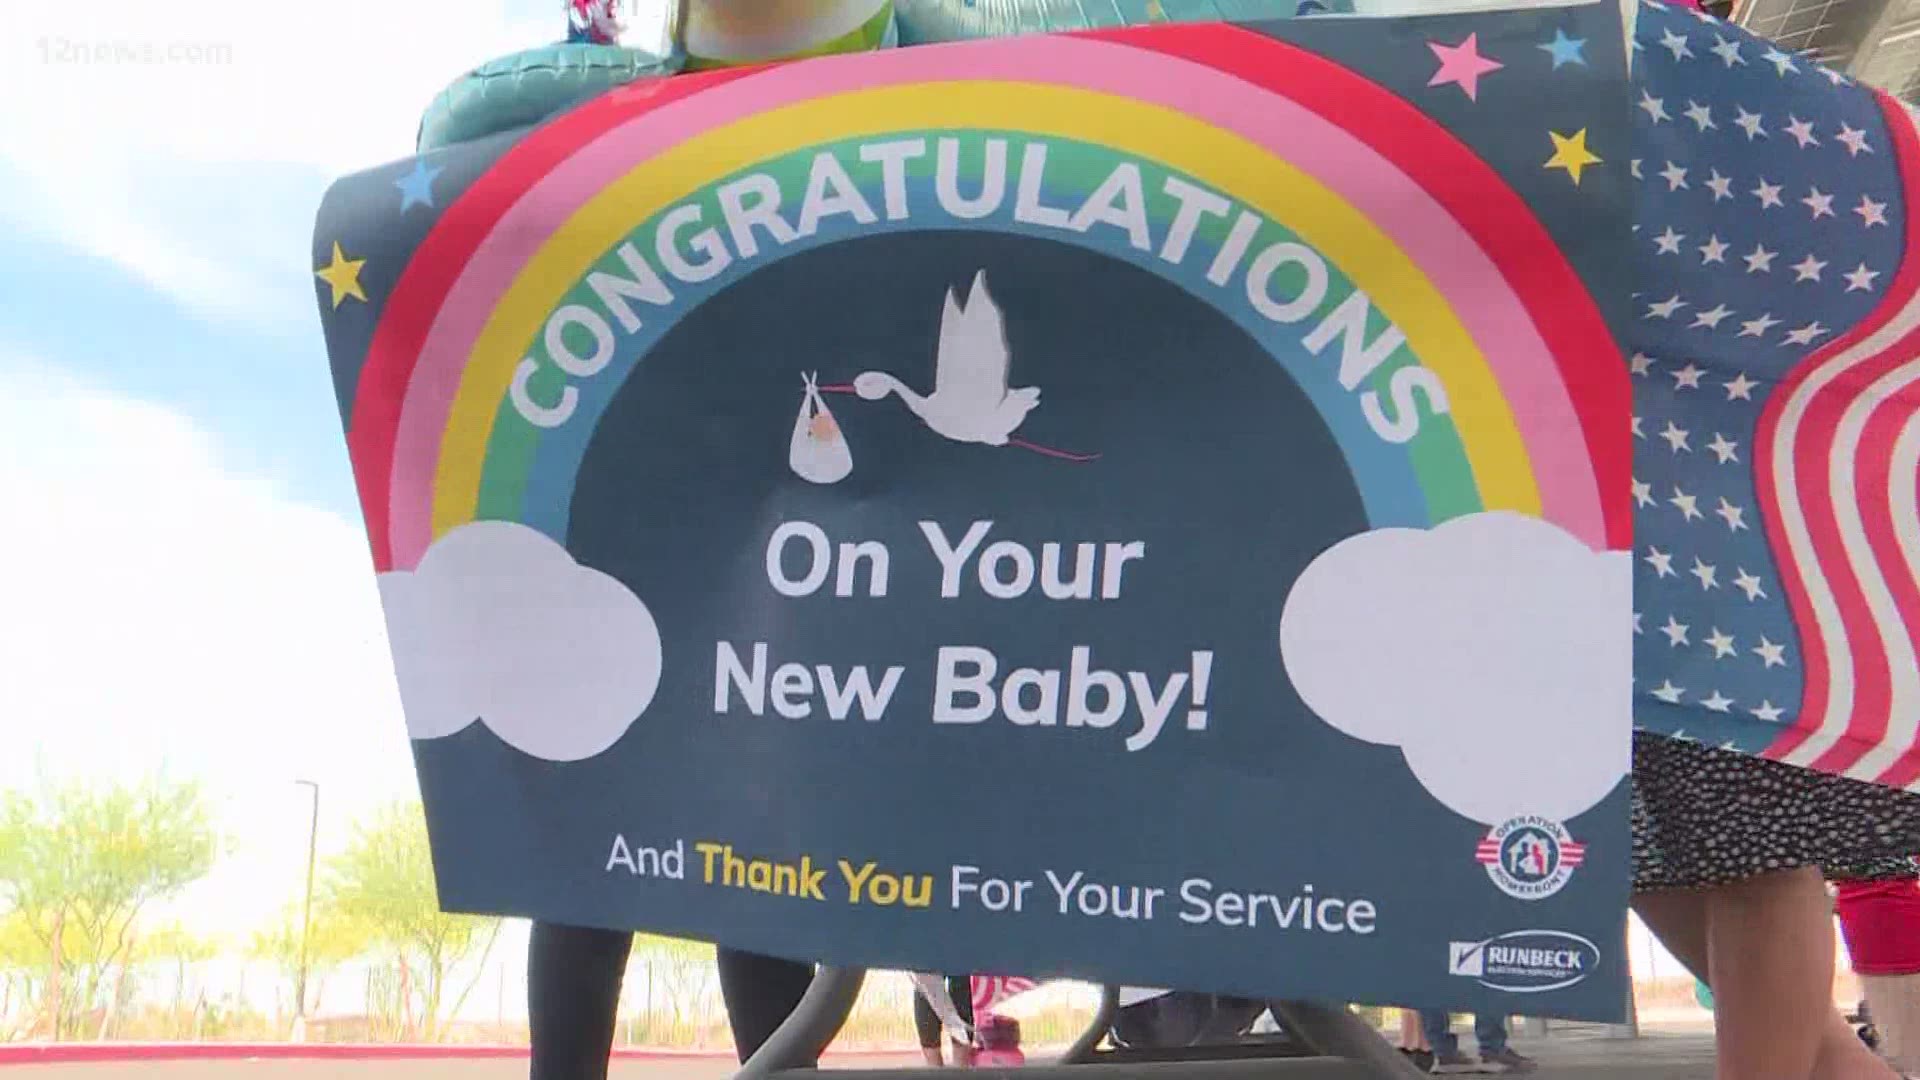 A special baby shower was held for 50 new and expecting military moms in the Valley Saturday morning.